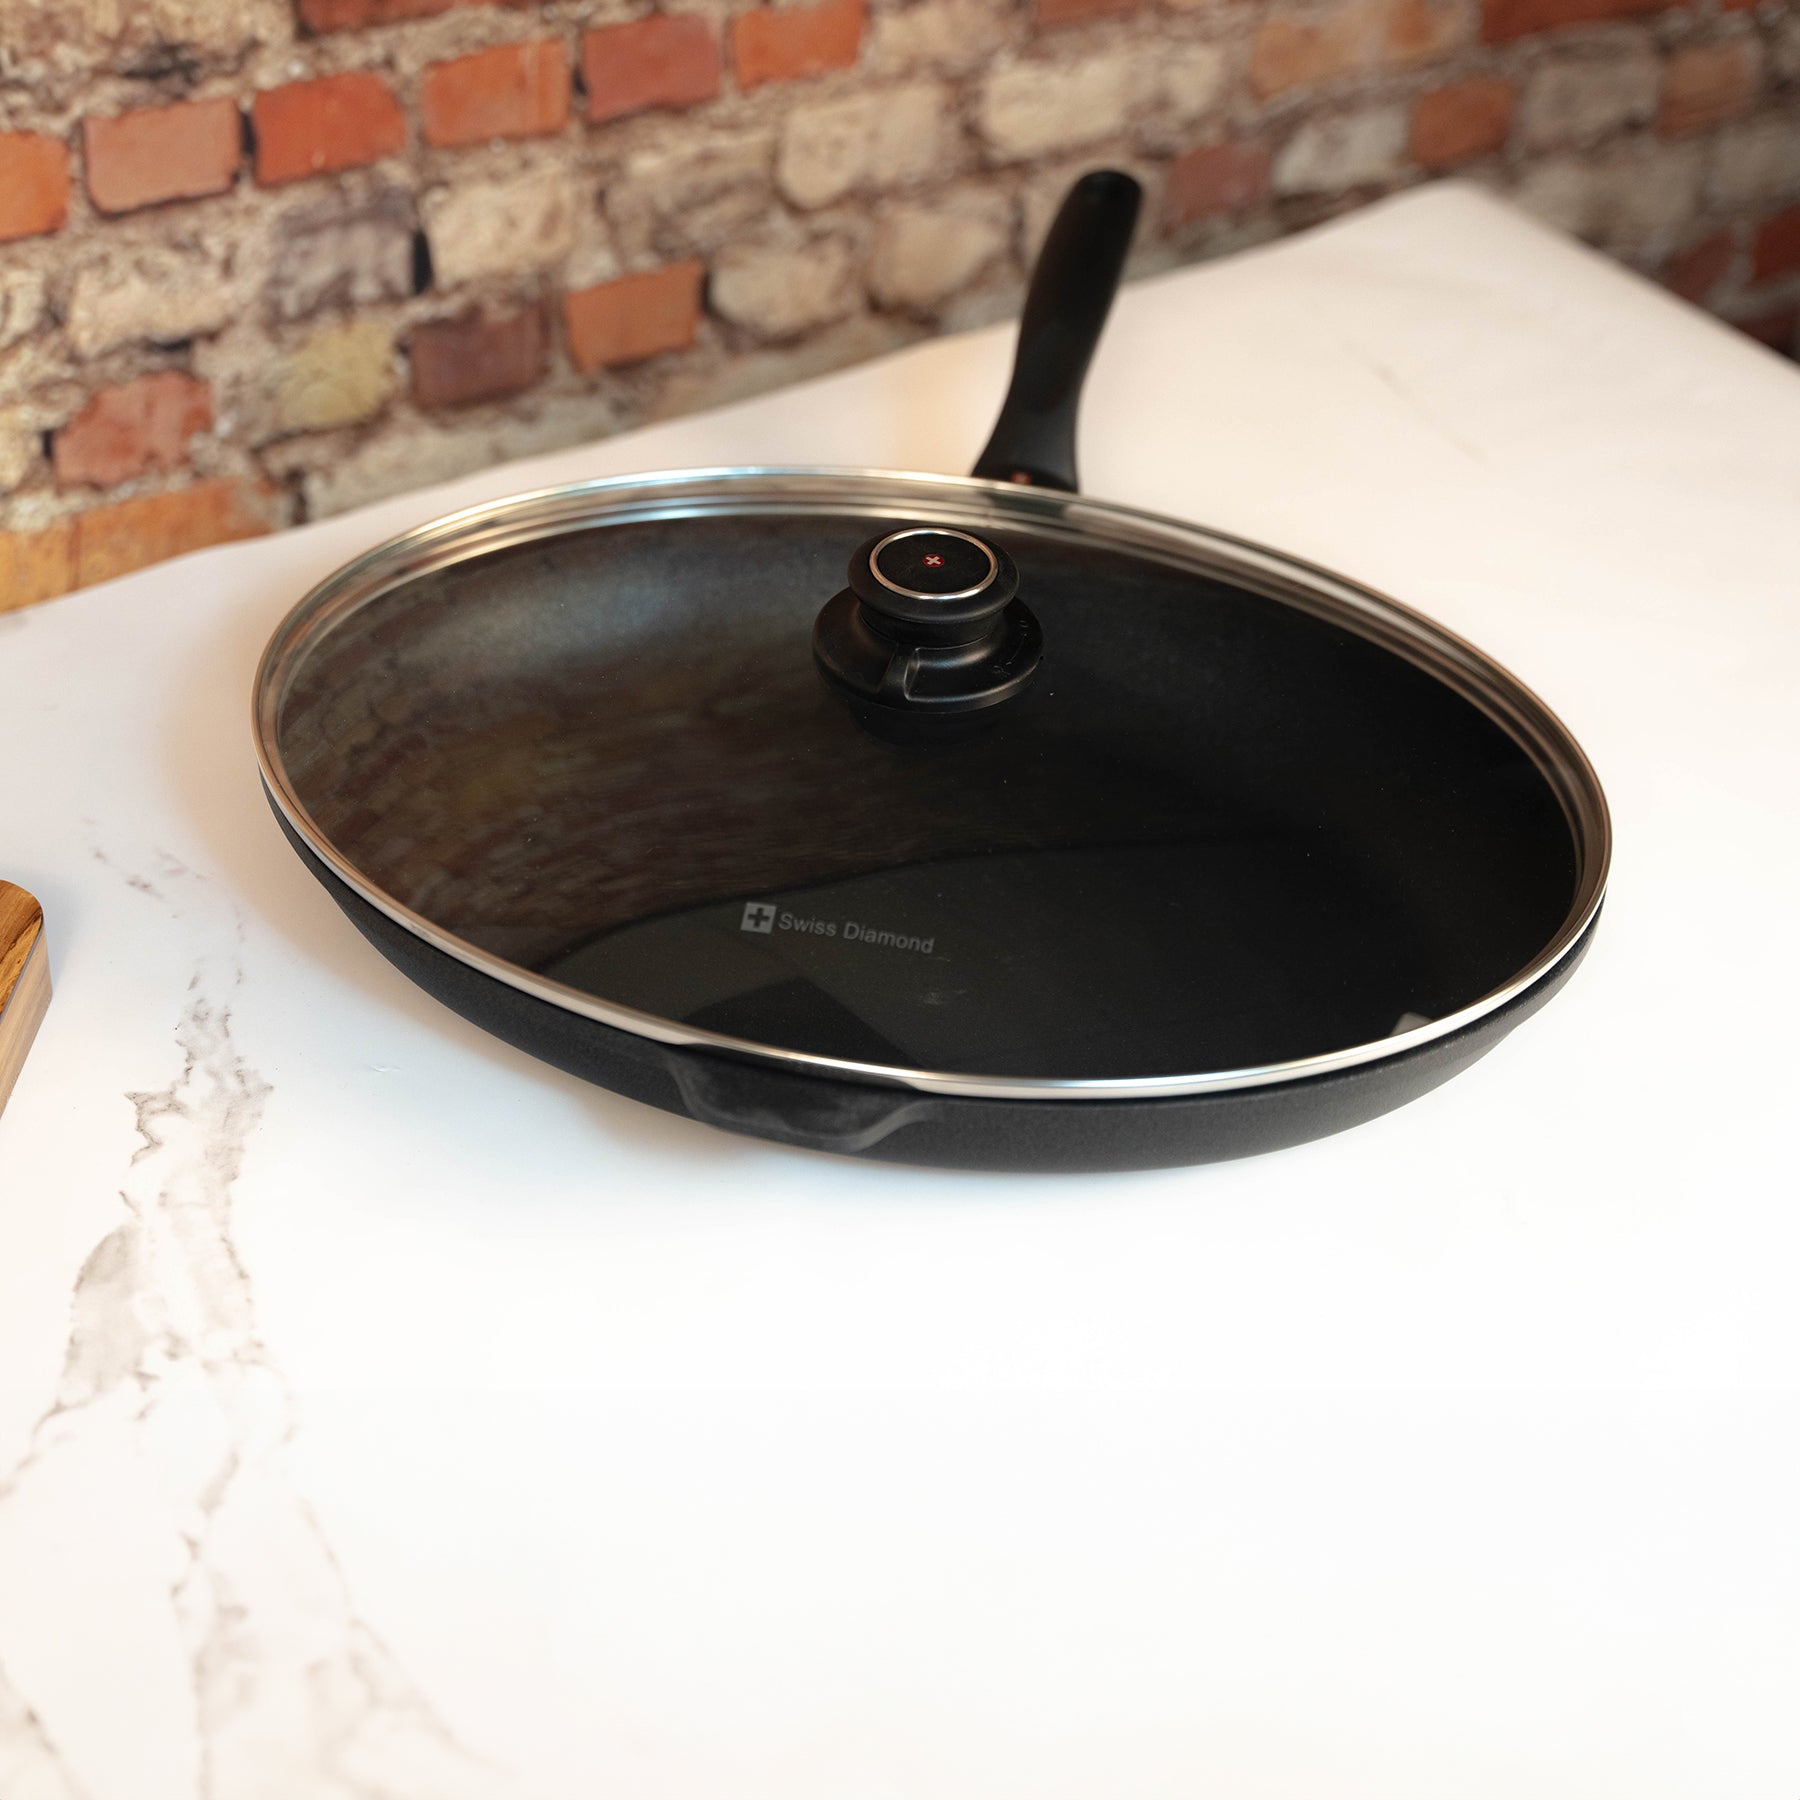 XD Nonstick Oval Fish Pan with Glass Lid in use on kitchen counter